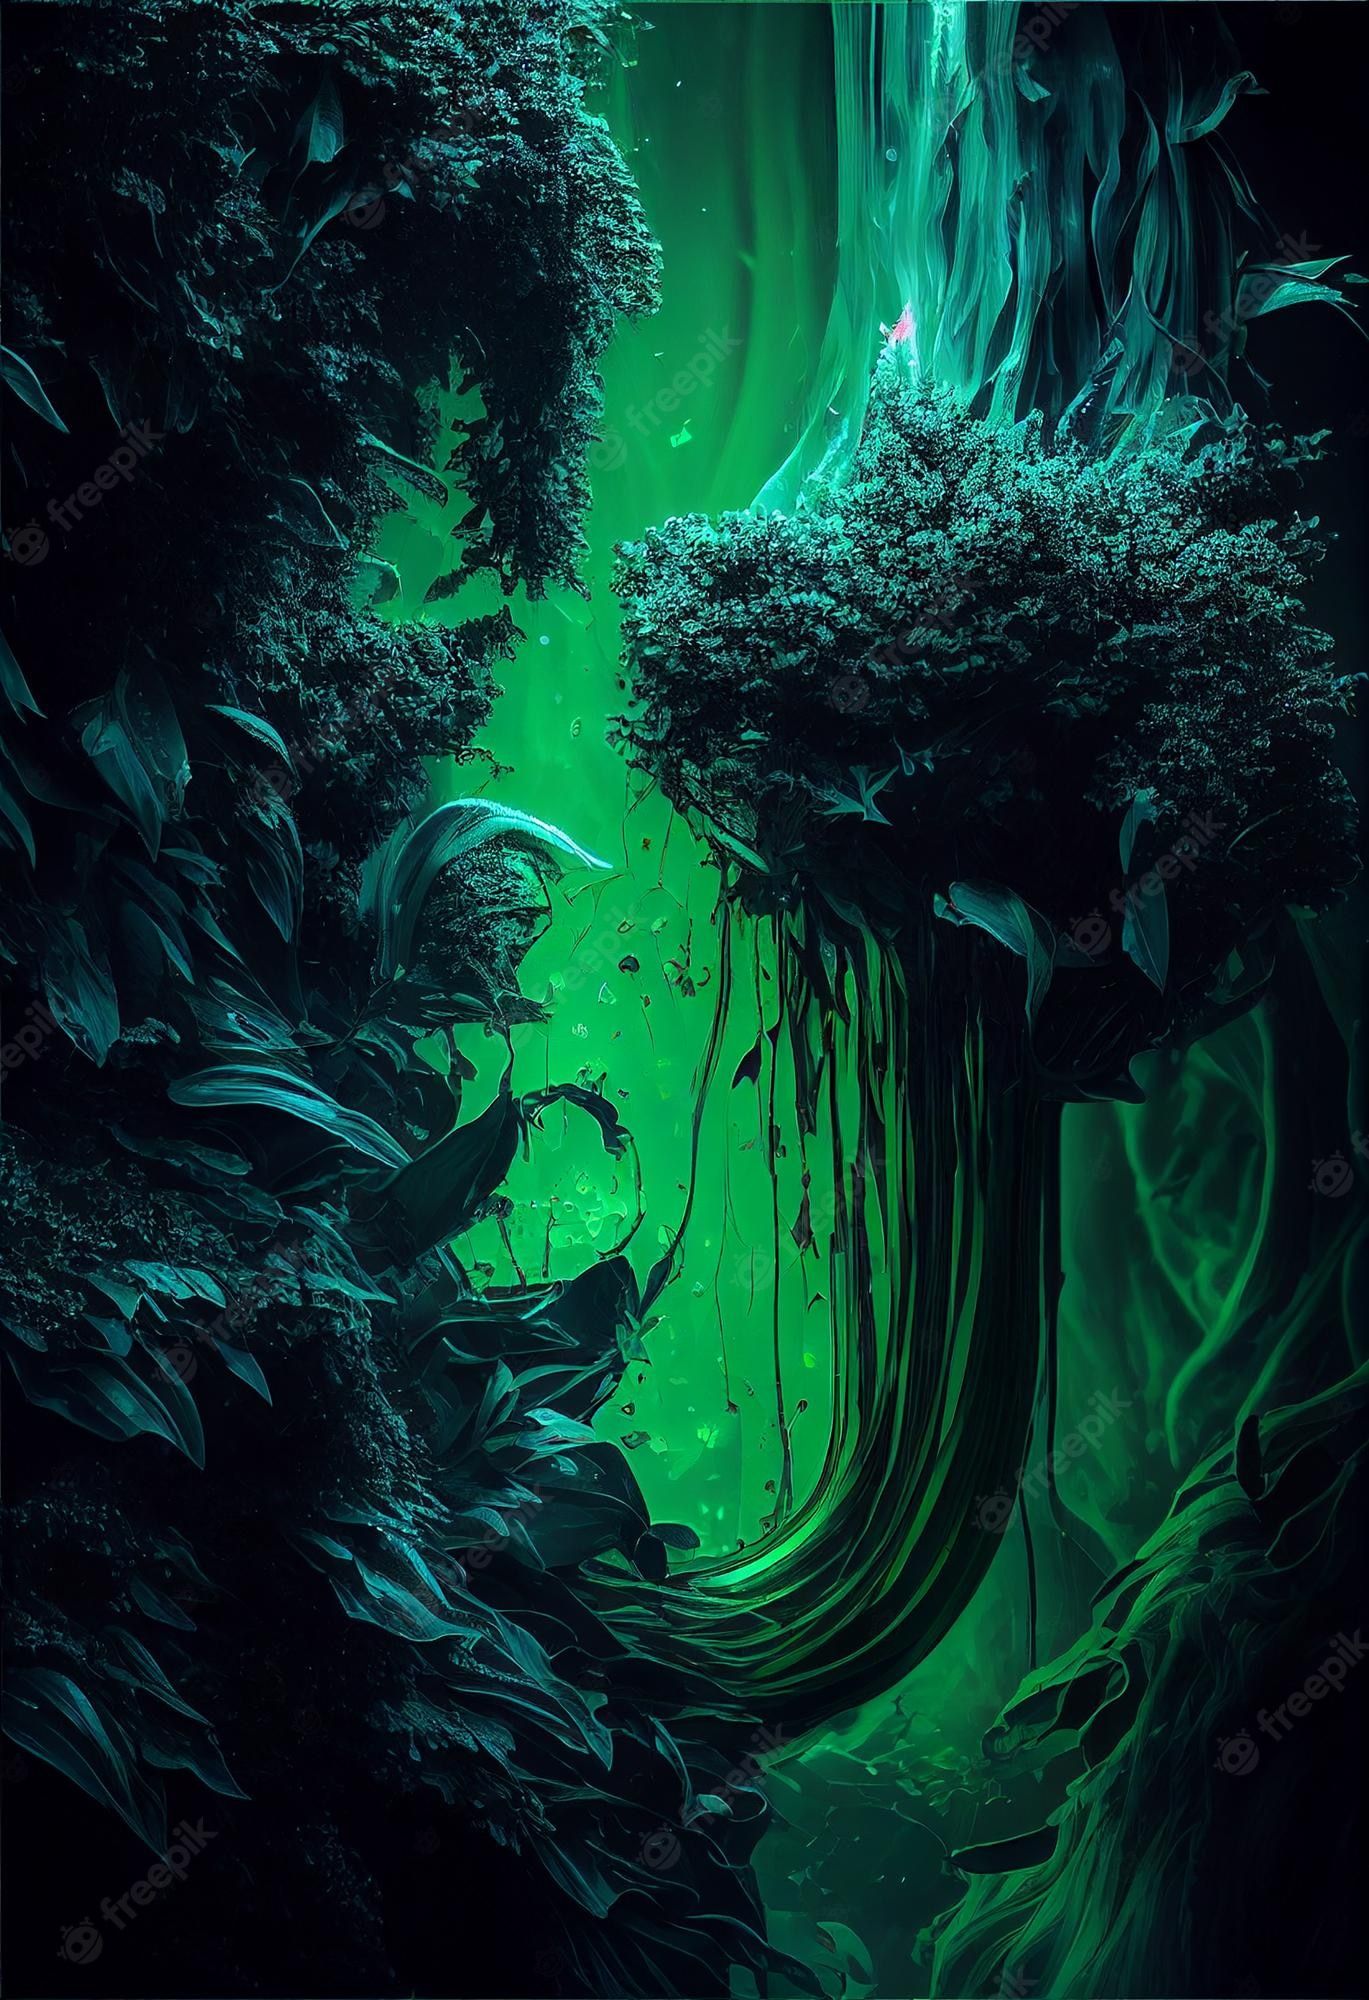 A green forest with glowing plants - Green